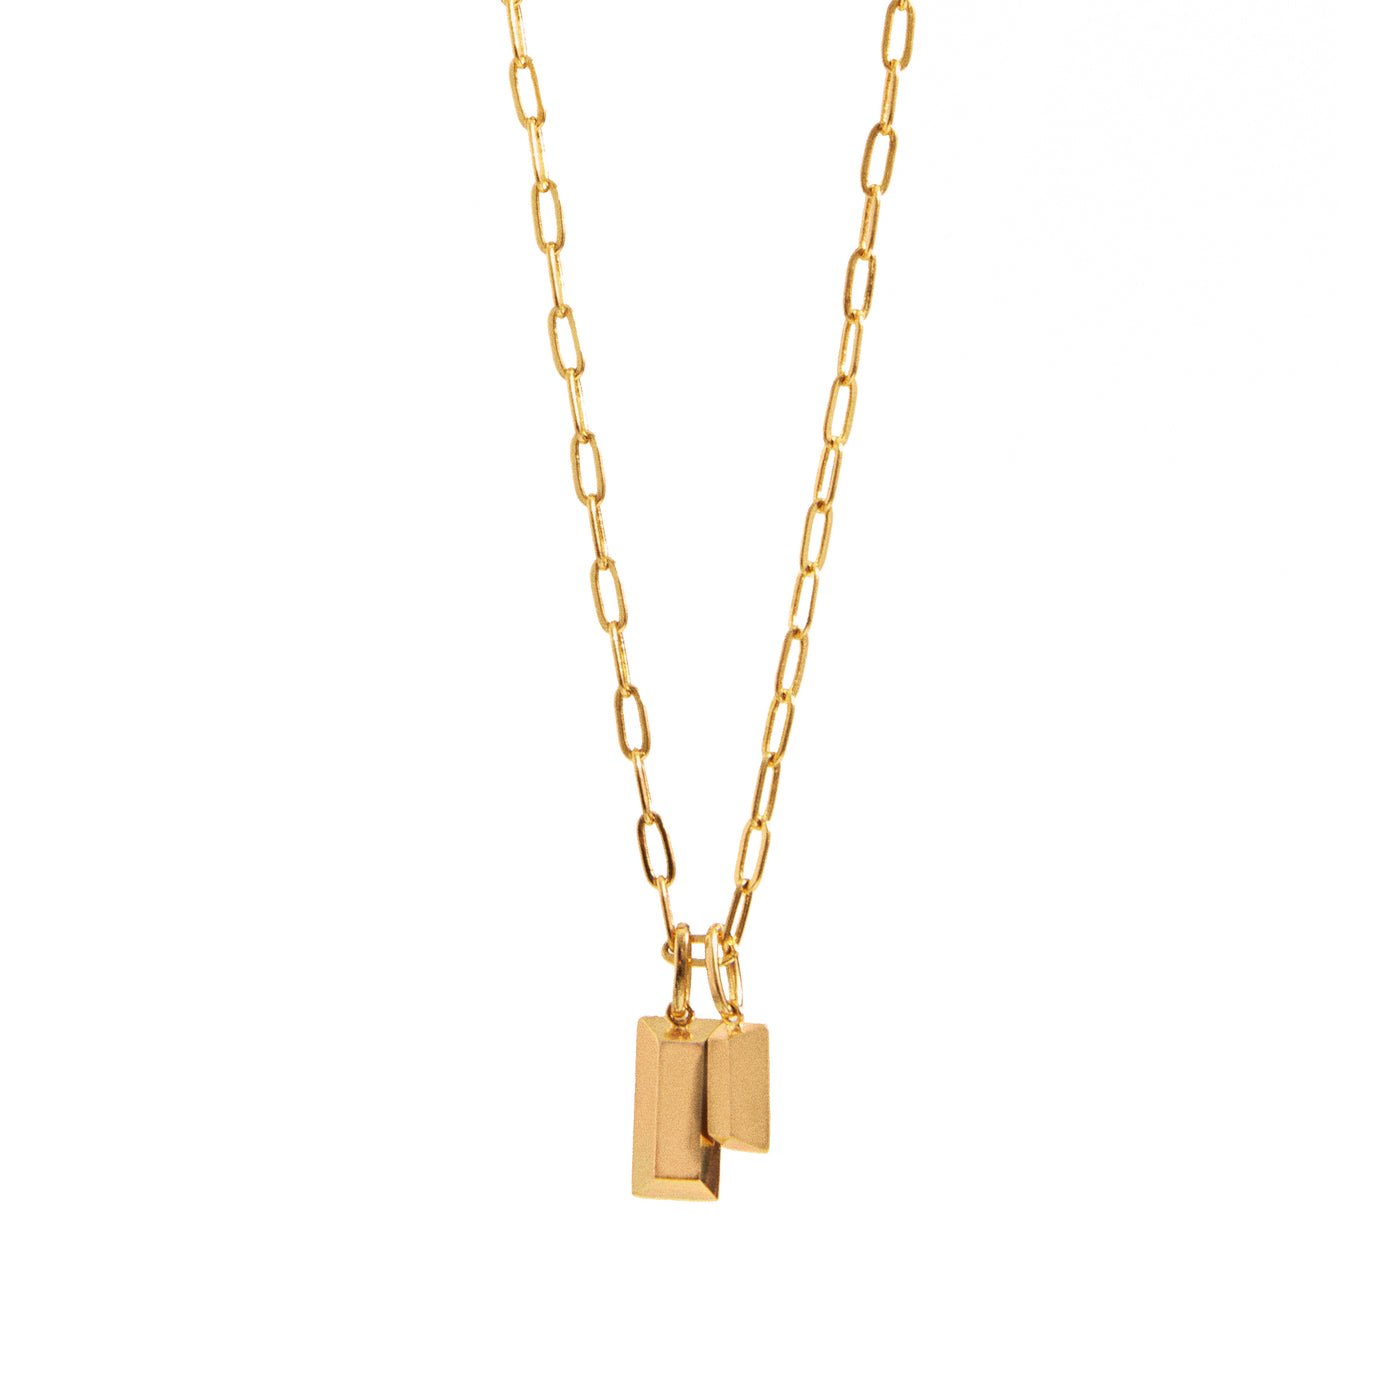 D'Oro Charm Necklace, 18KT Gold